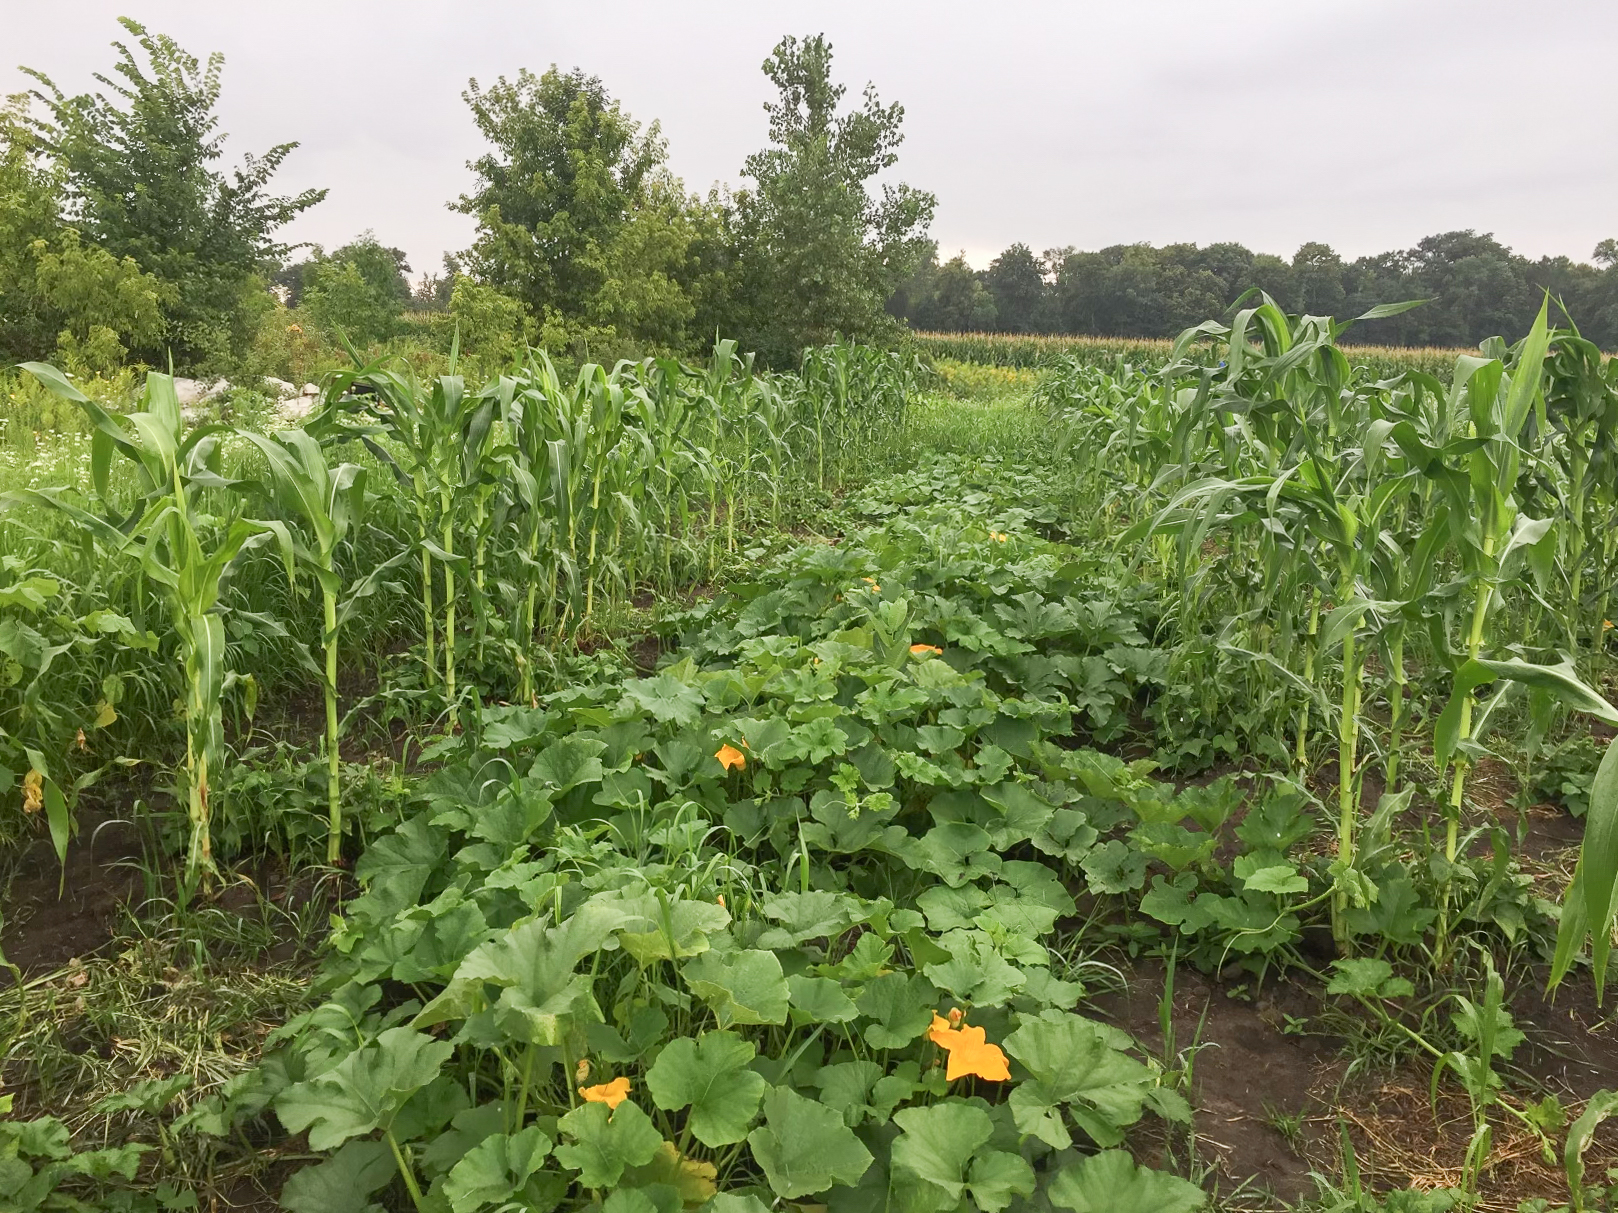 A farm lush with green vegetation. There are rows of squash plants with a few blooms and tall corn.